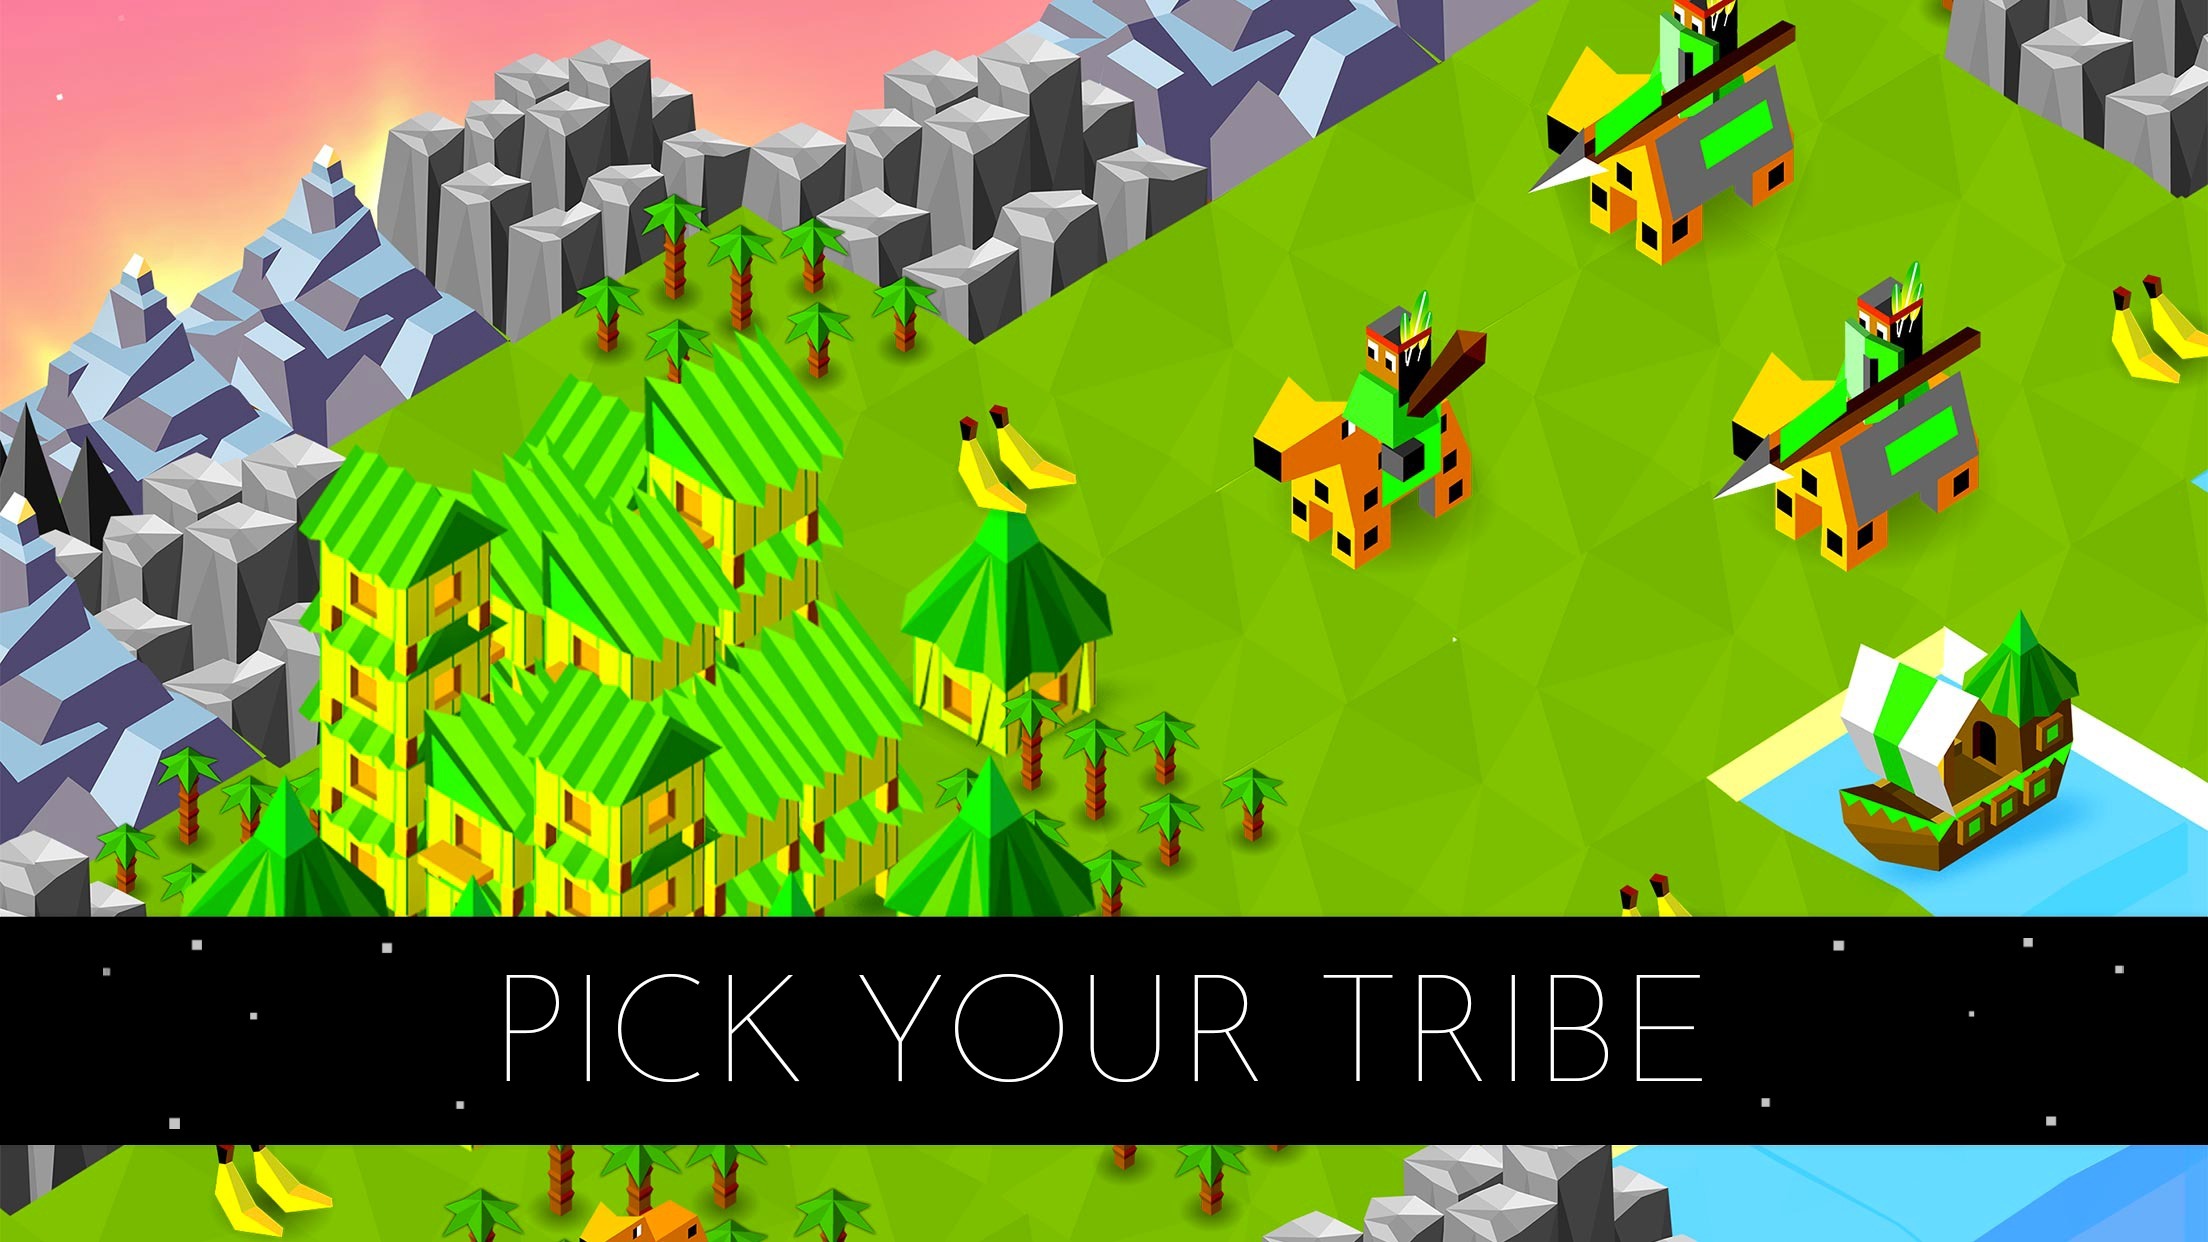 5 Great Strategy Games for Android - Phandroid